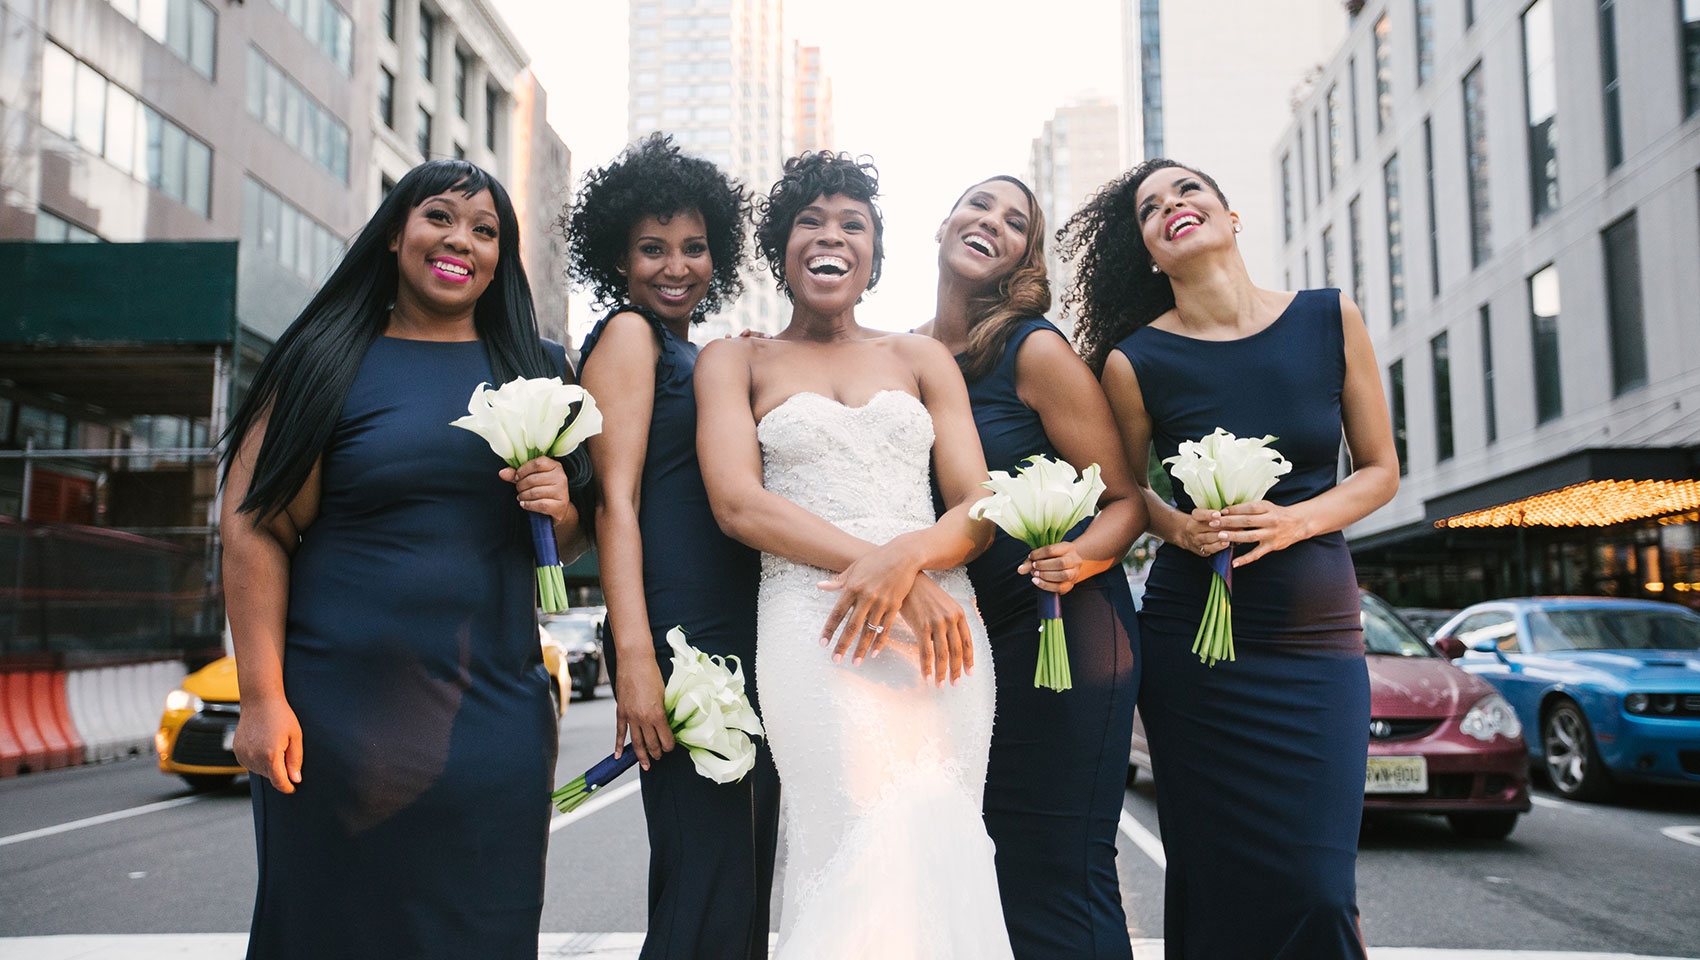 Ahkilah in her wedding dress with bridesmaids holding flowers on a street crosswalk